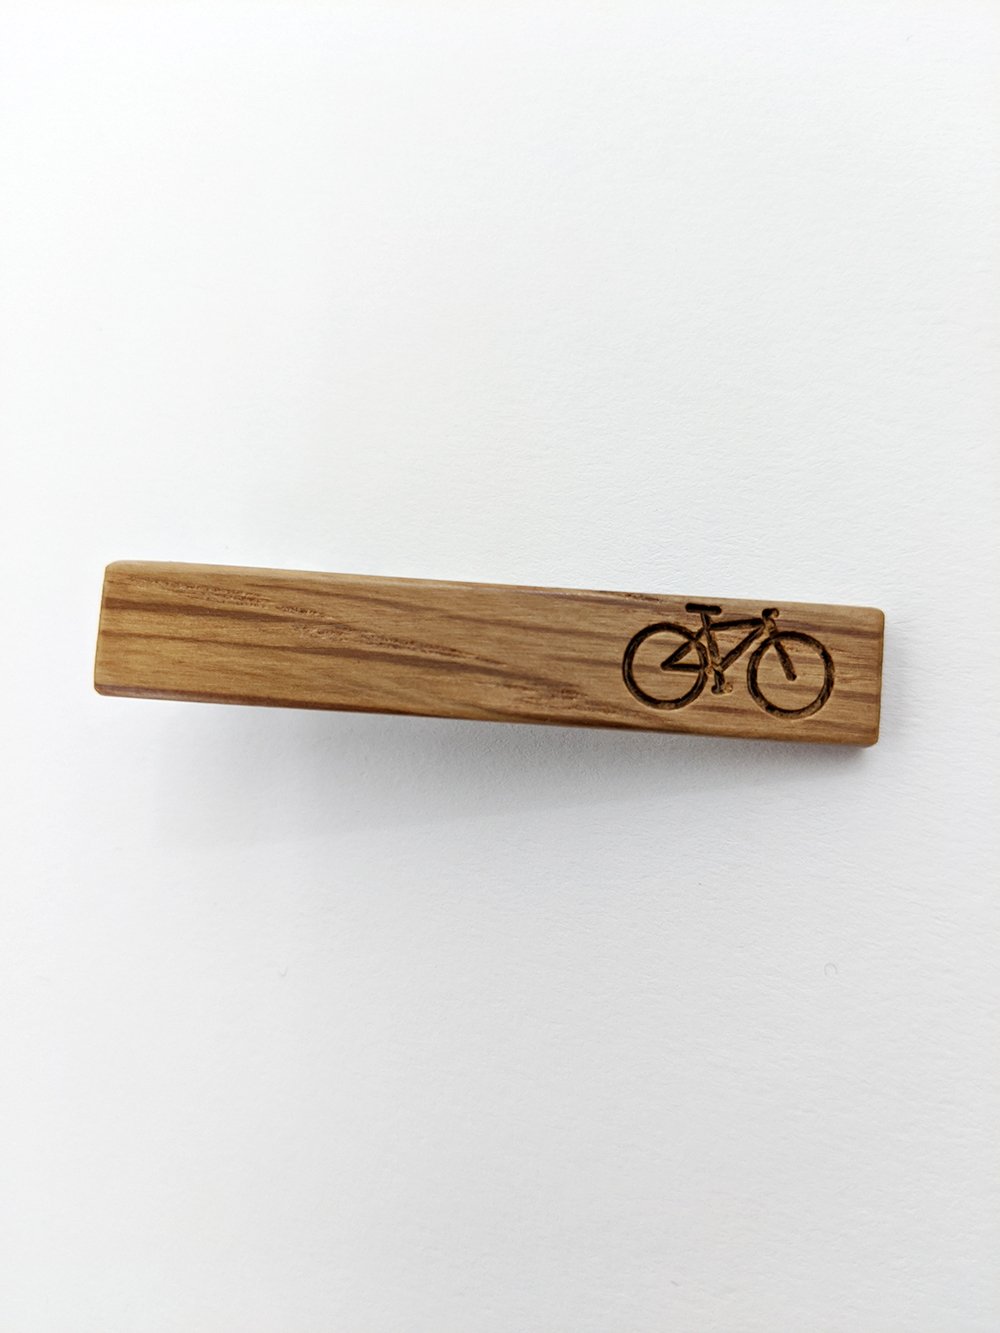 The Silent Pine's Hand Made Wood tie clips